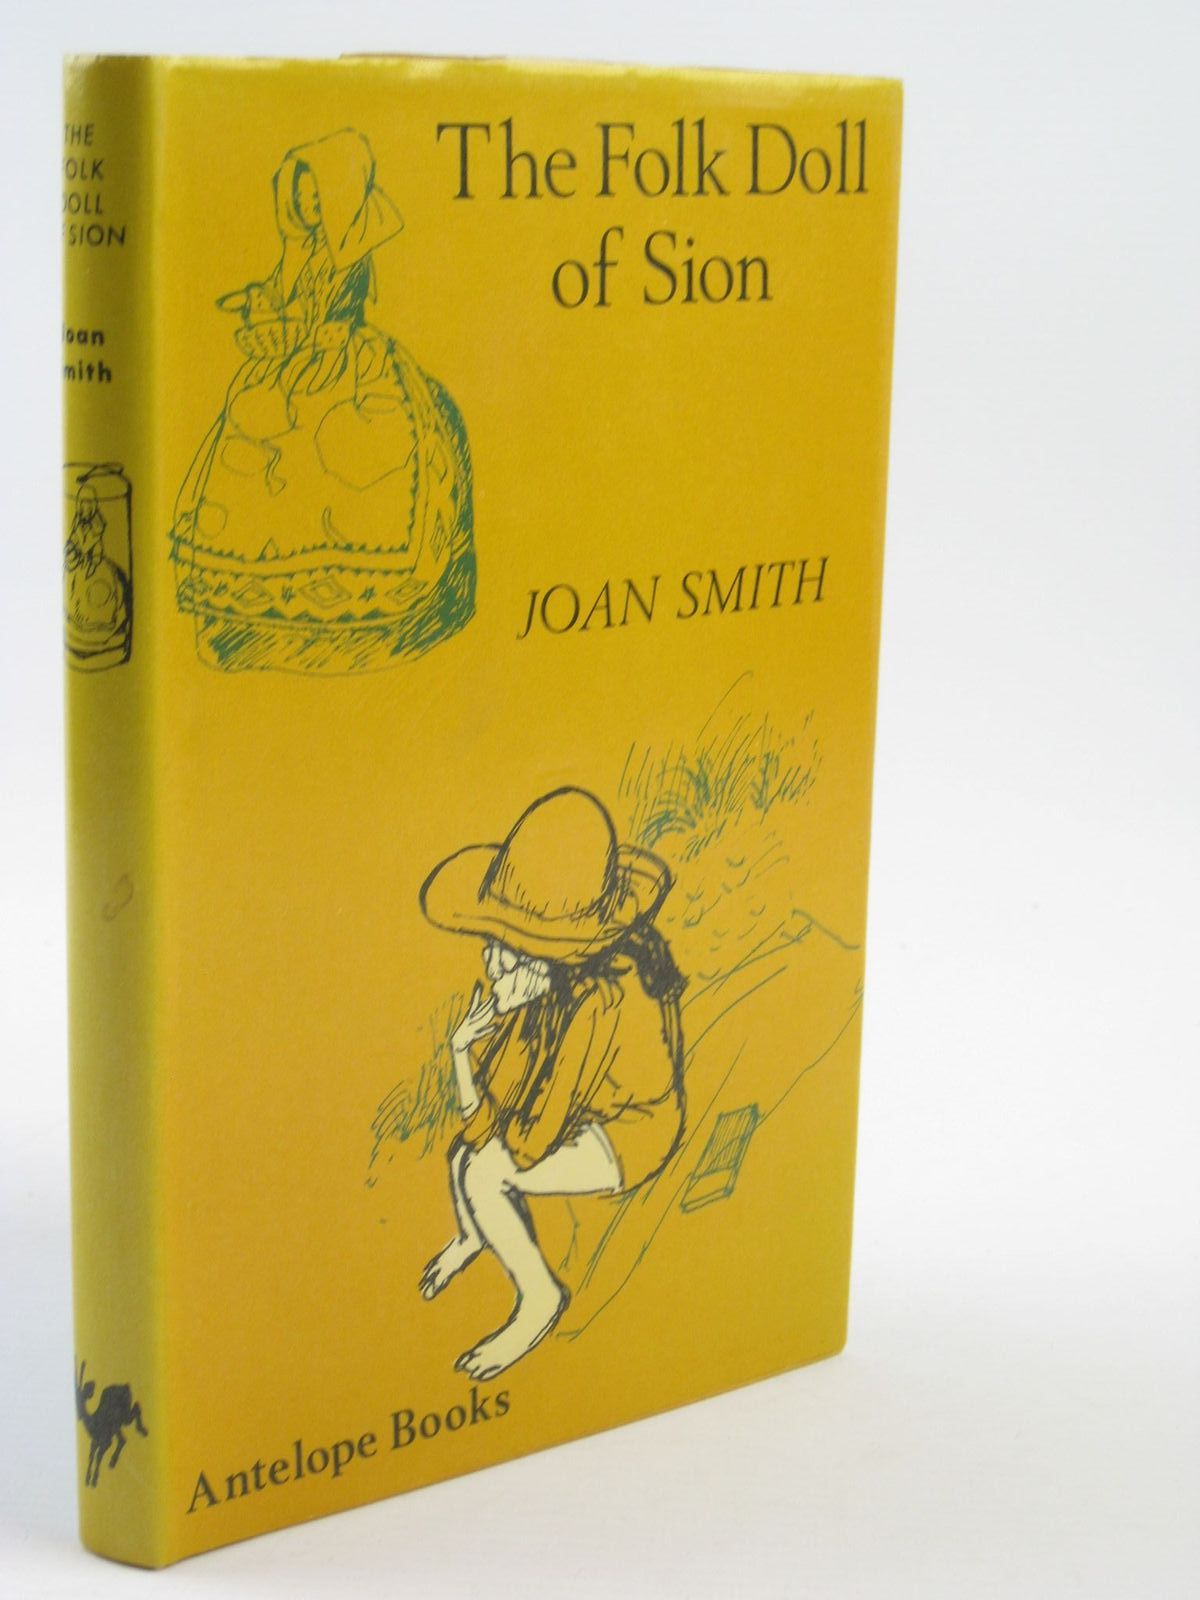 Cover of THE FOLK DOLL OF SION by Joan Smith